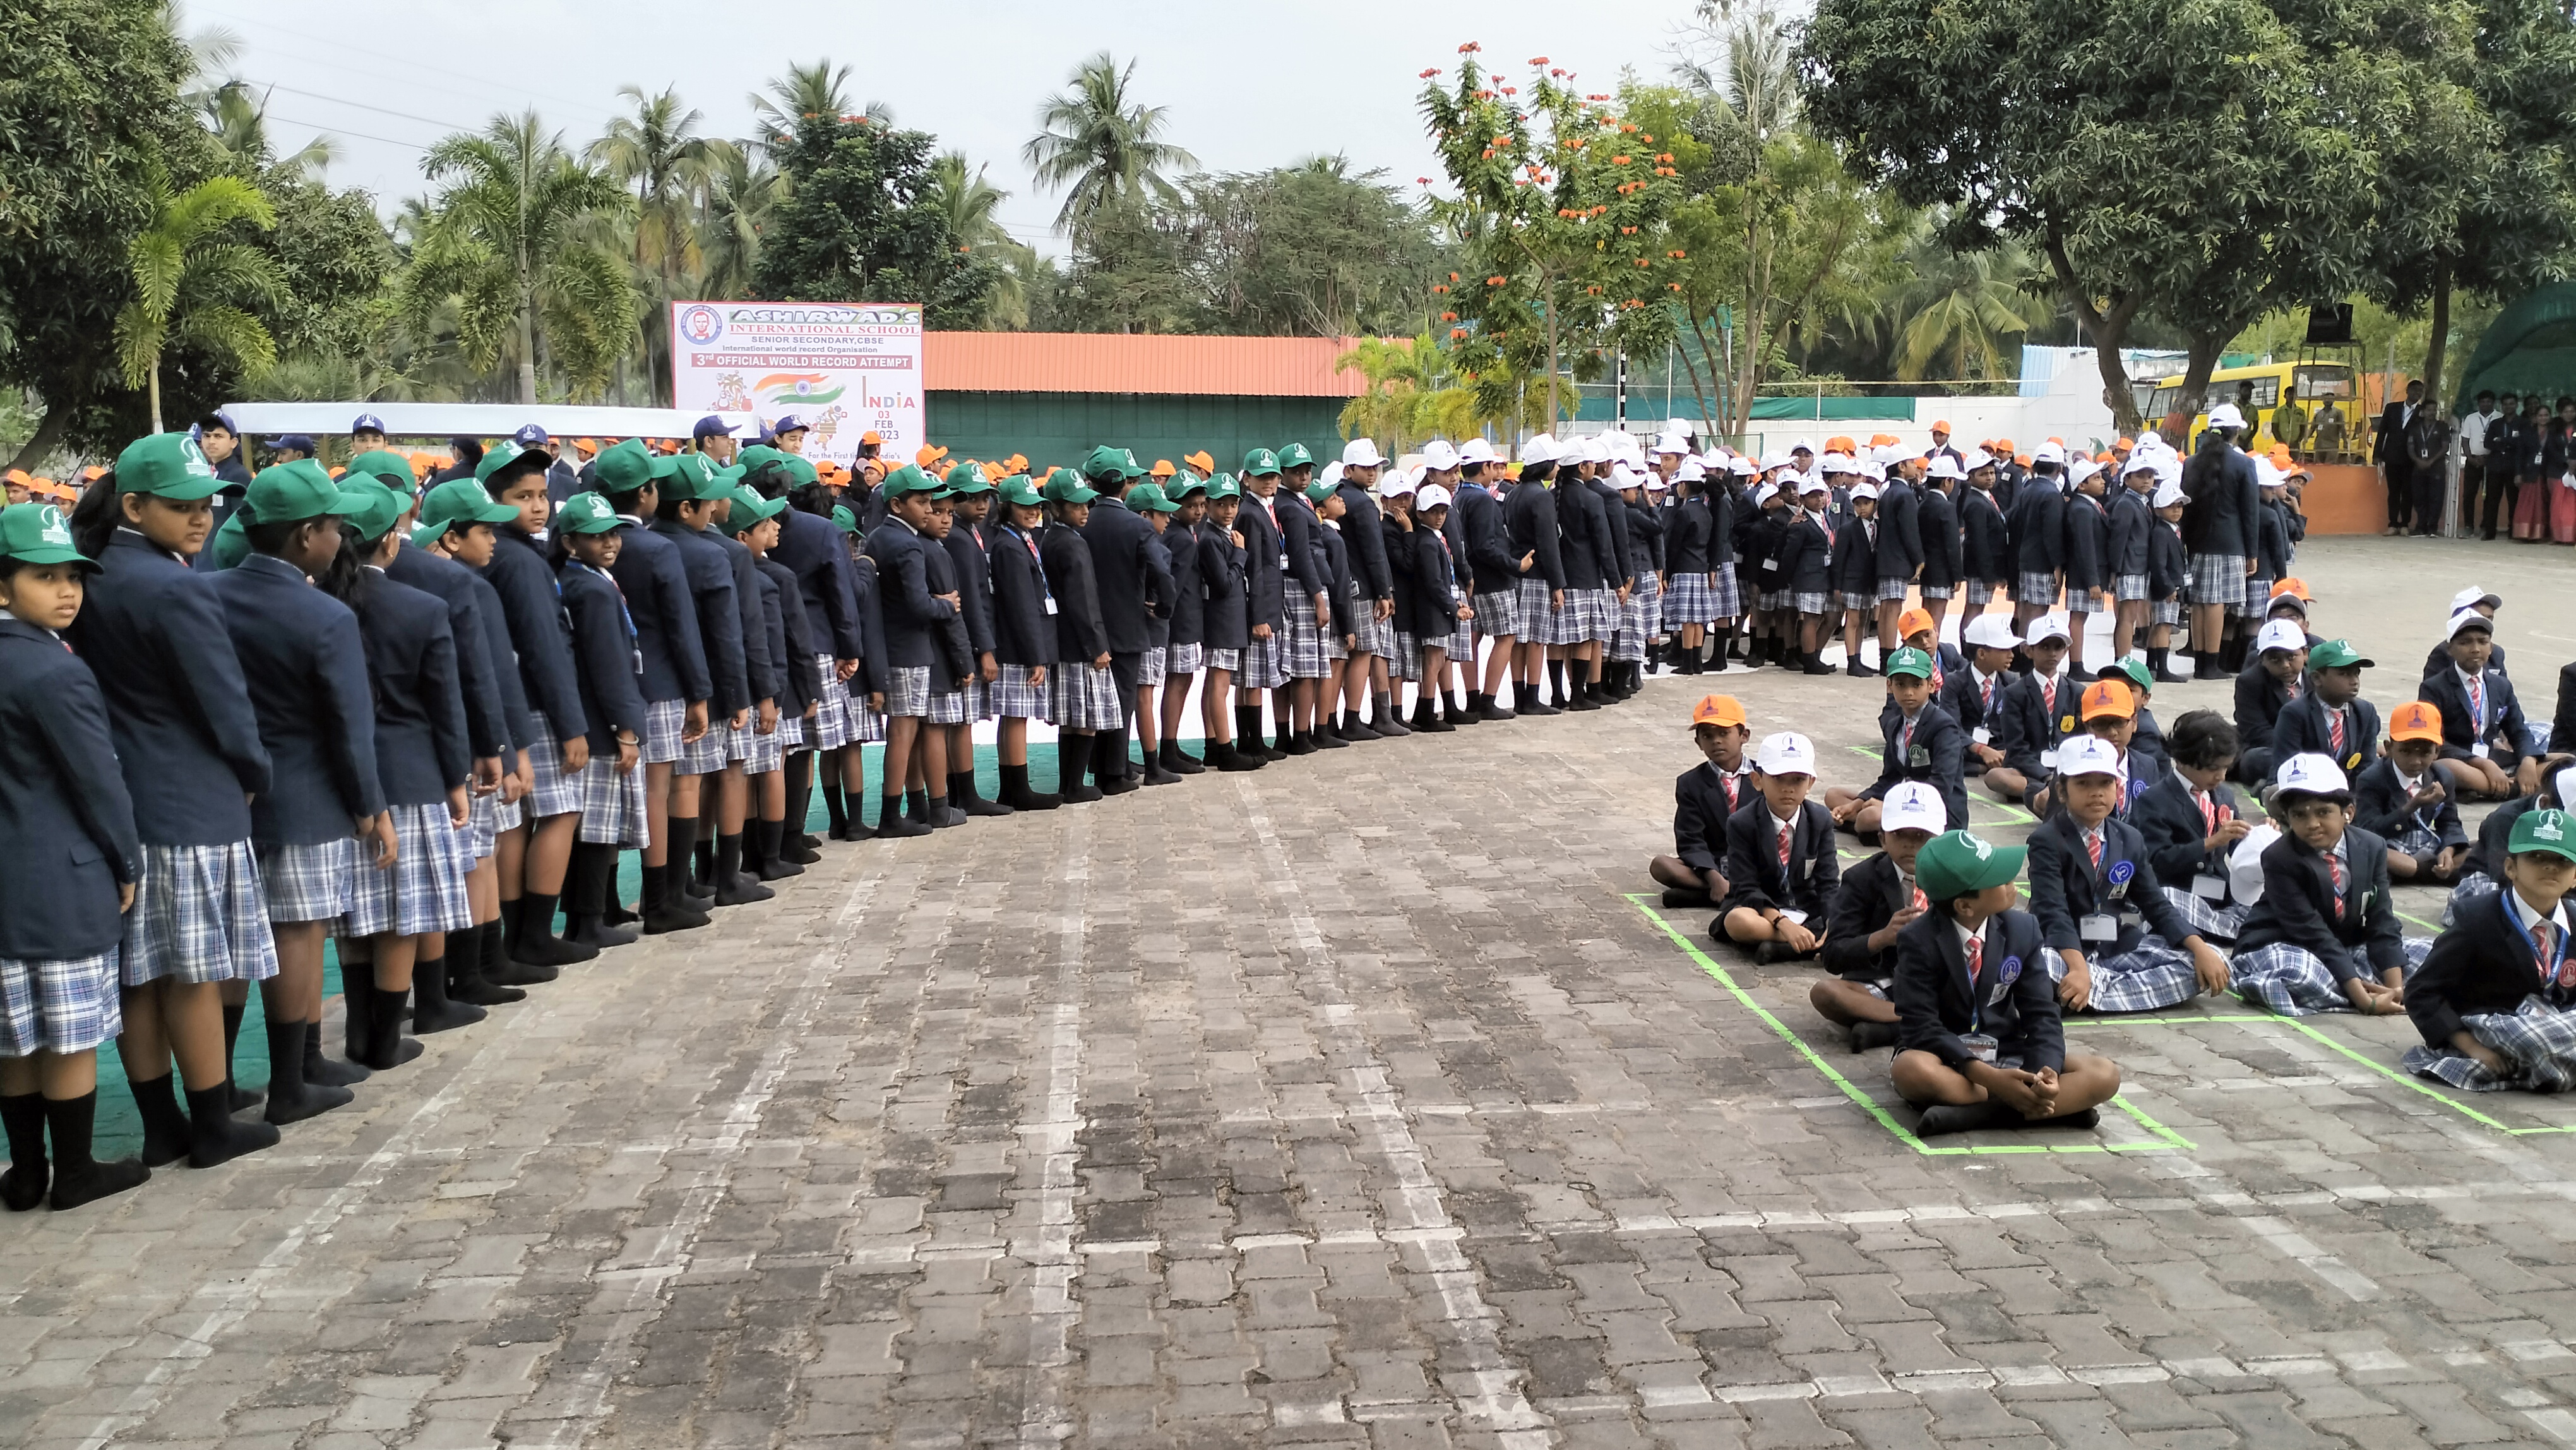 "For the First Time on India's 74th Republic day Ashirwad's International School  students reciting 465 articles of Indian constitution in many Indian Languages  and standing in the human portrait of Indian map"